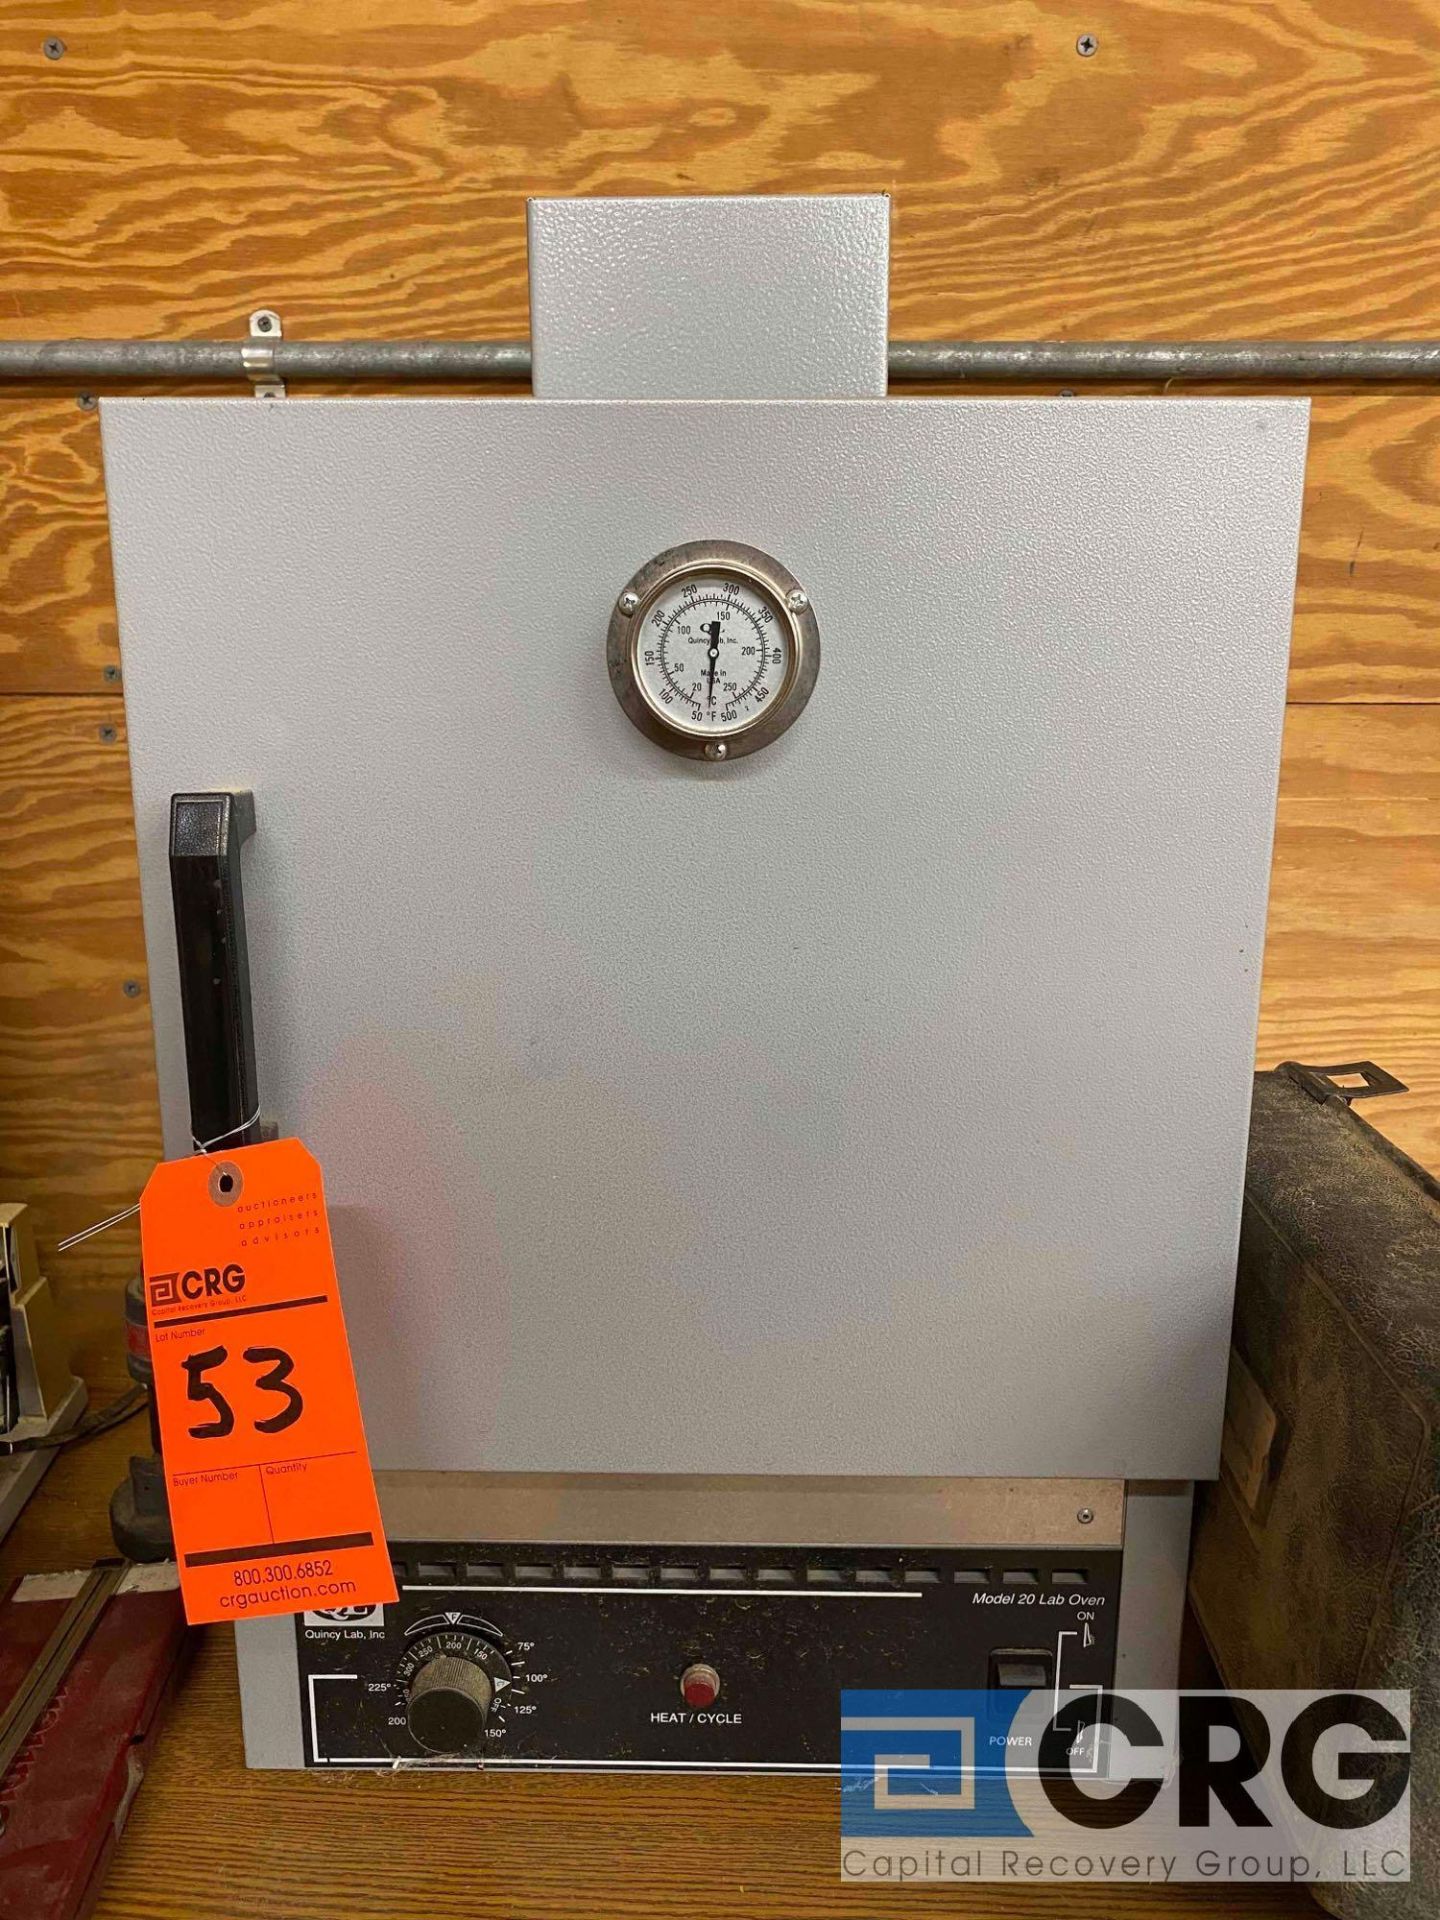 Quincy lab 20AF lab oven, 8.8amp 120v, SN A2-3028-LOCATED IN PINE VALLEY